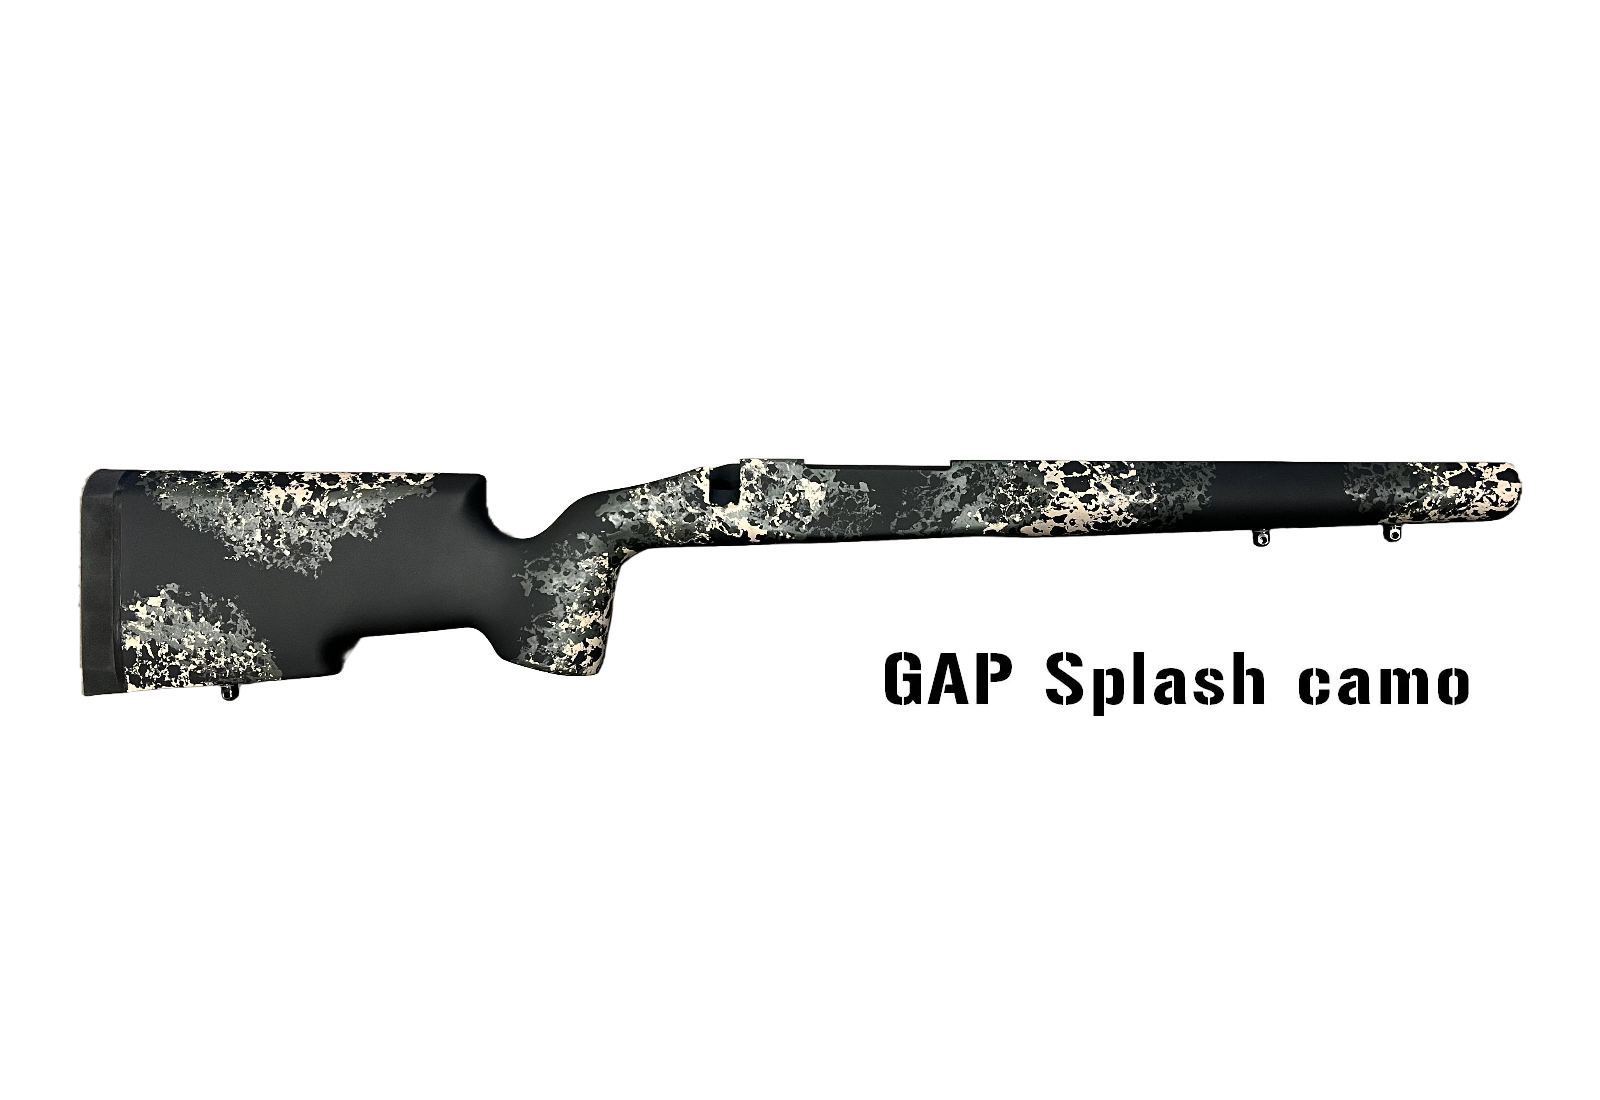 Renegade - Right Hand Rem 700 Long Action, M5, 1.250" Straight.  Custom Painted GAP camo.